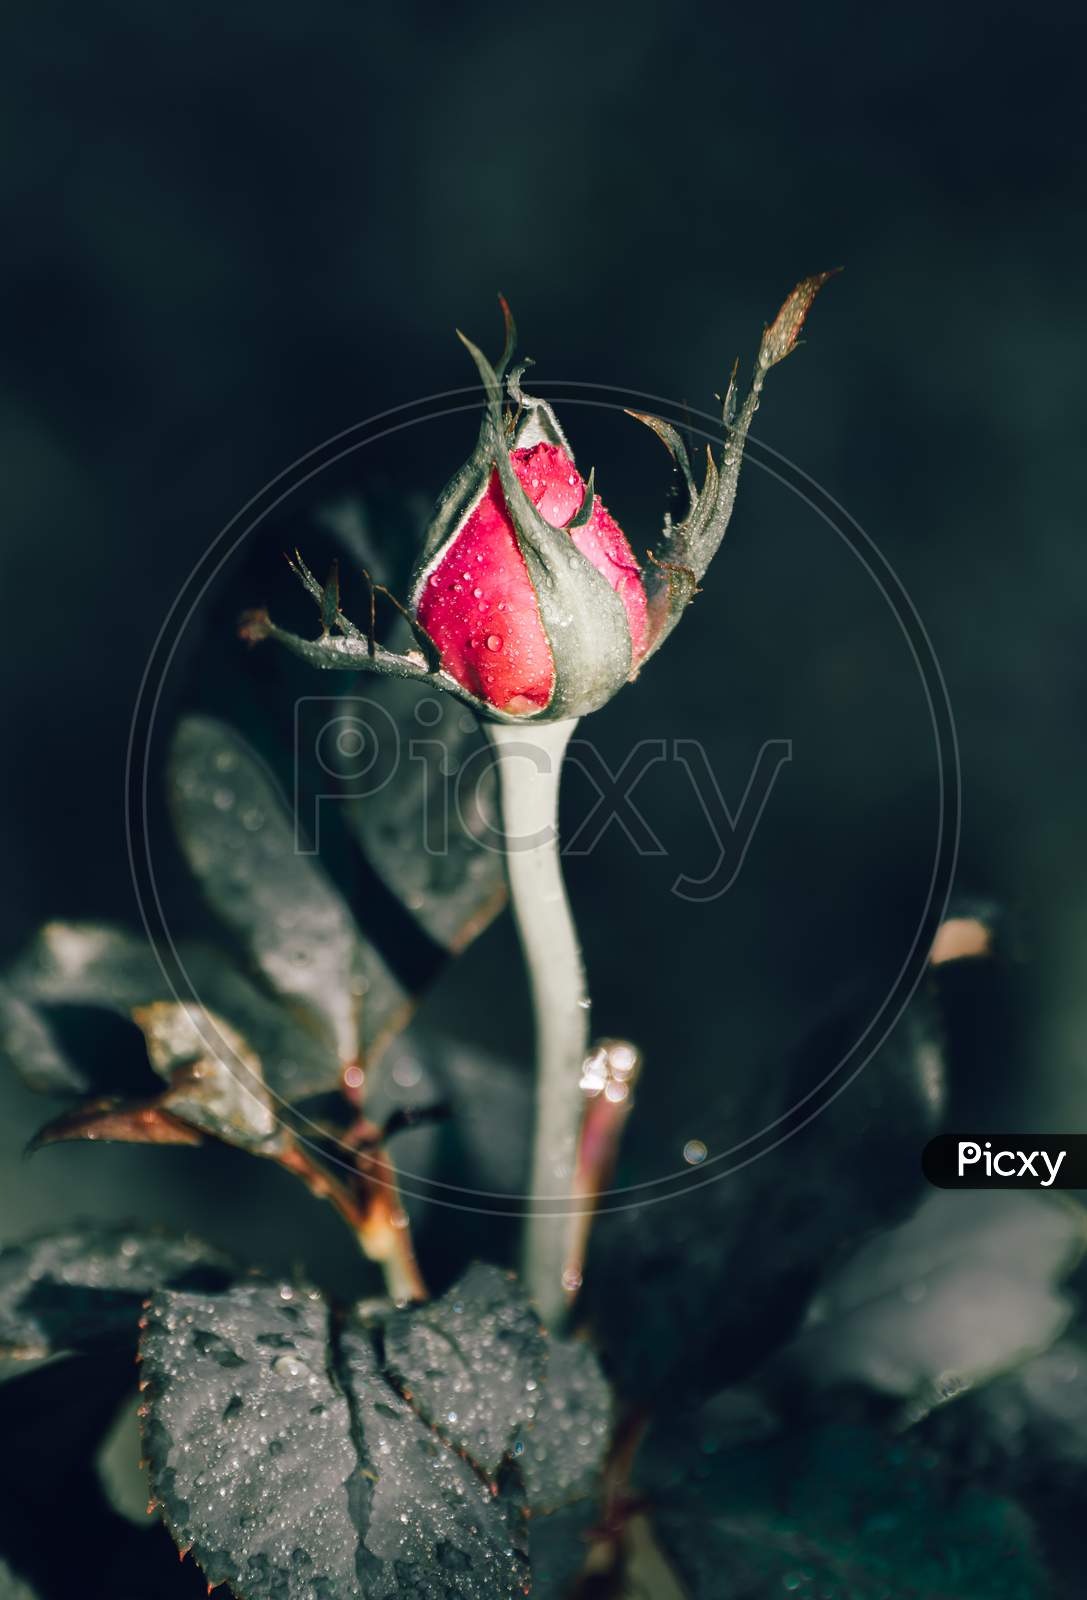 Rose Bud In The Dark Close Up Vertical Photograph,